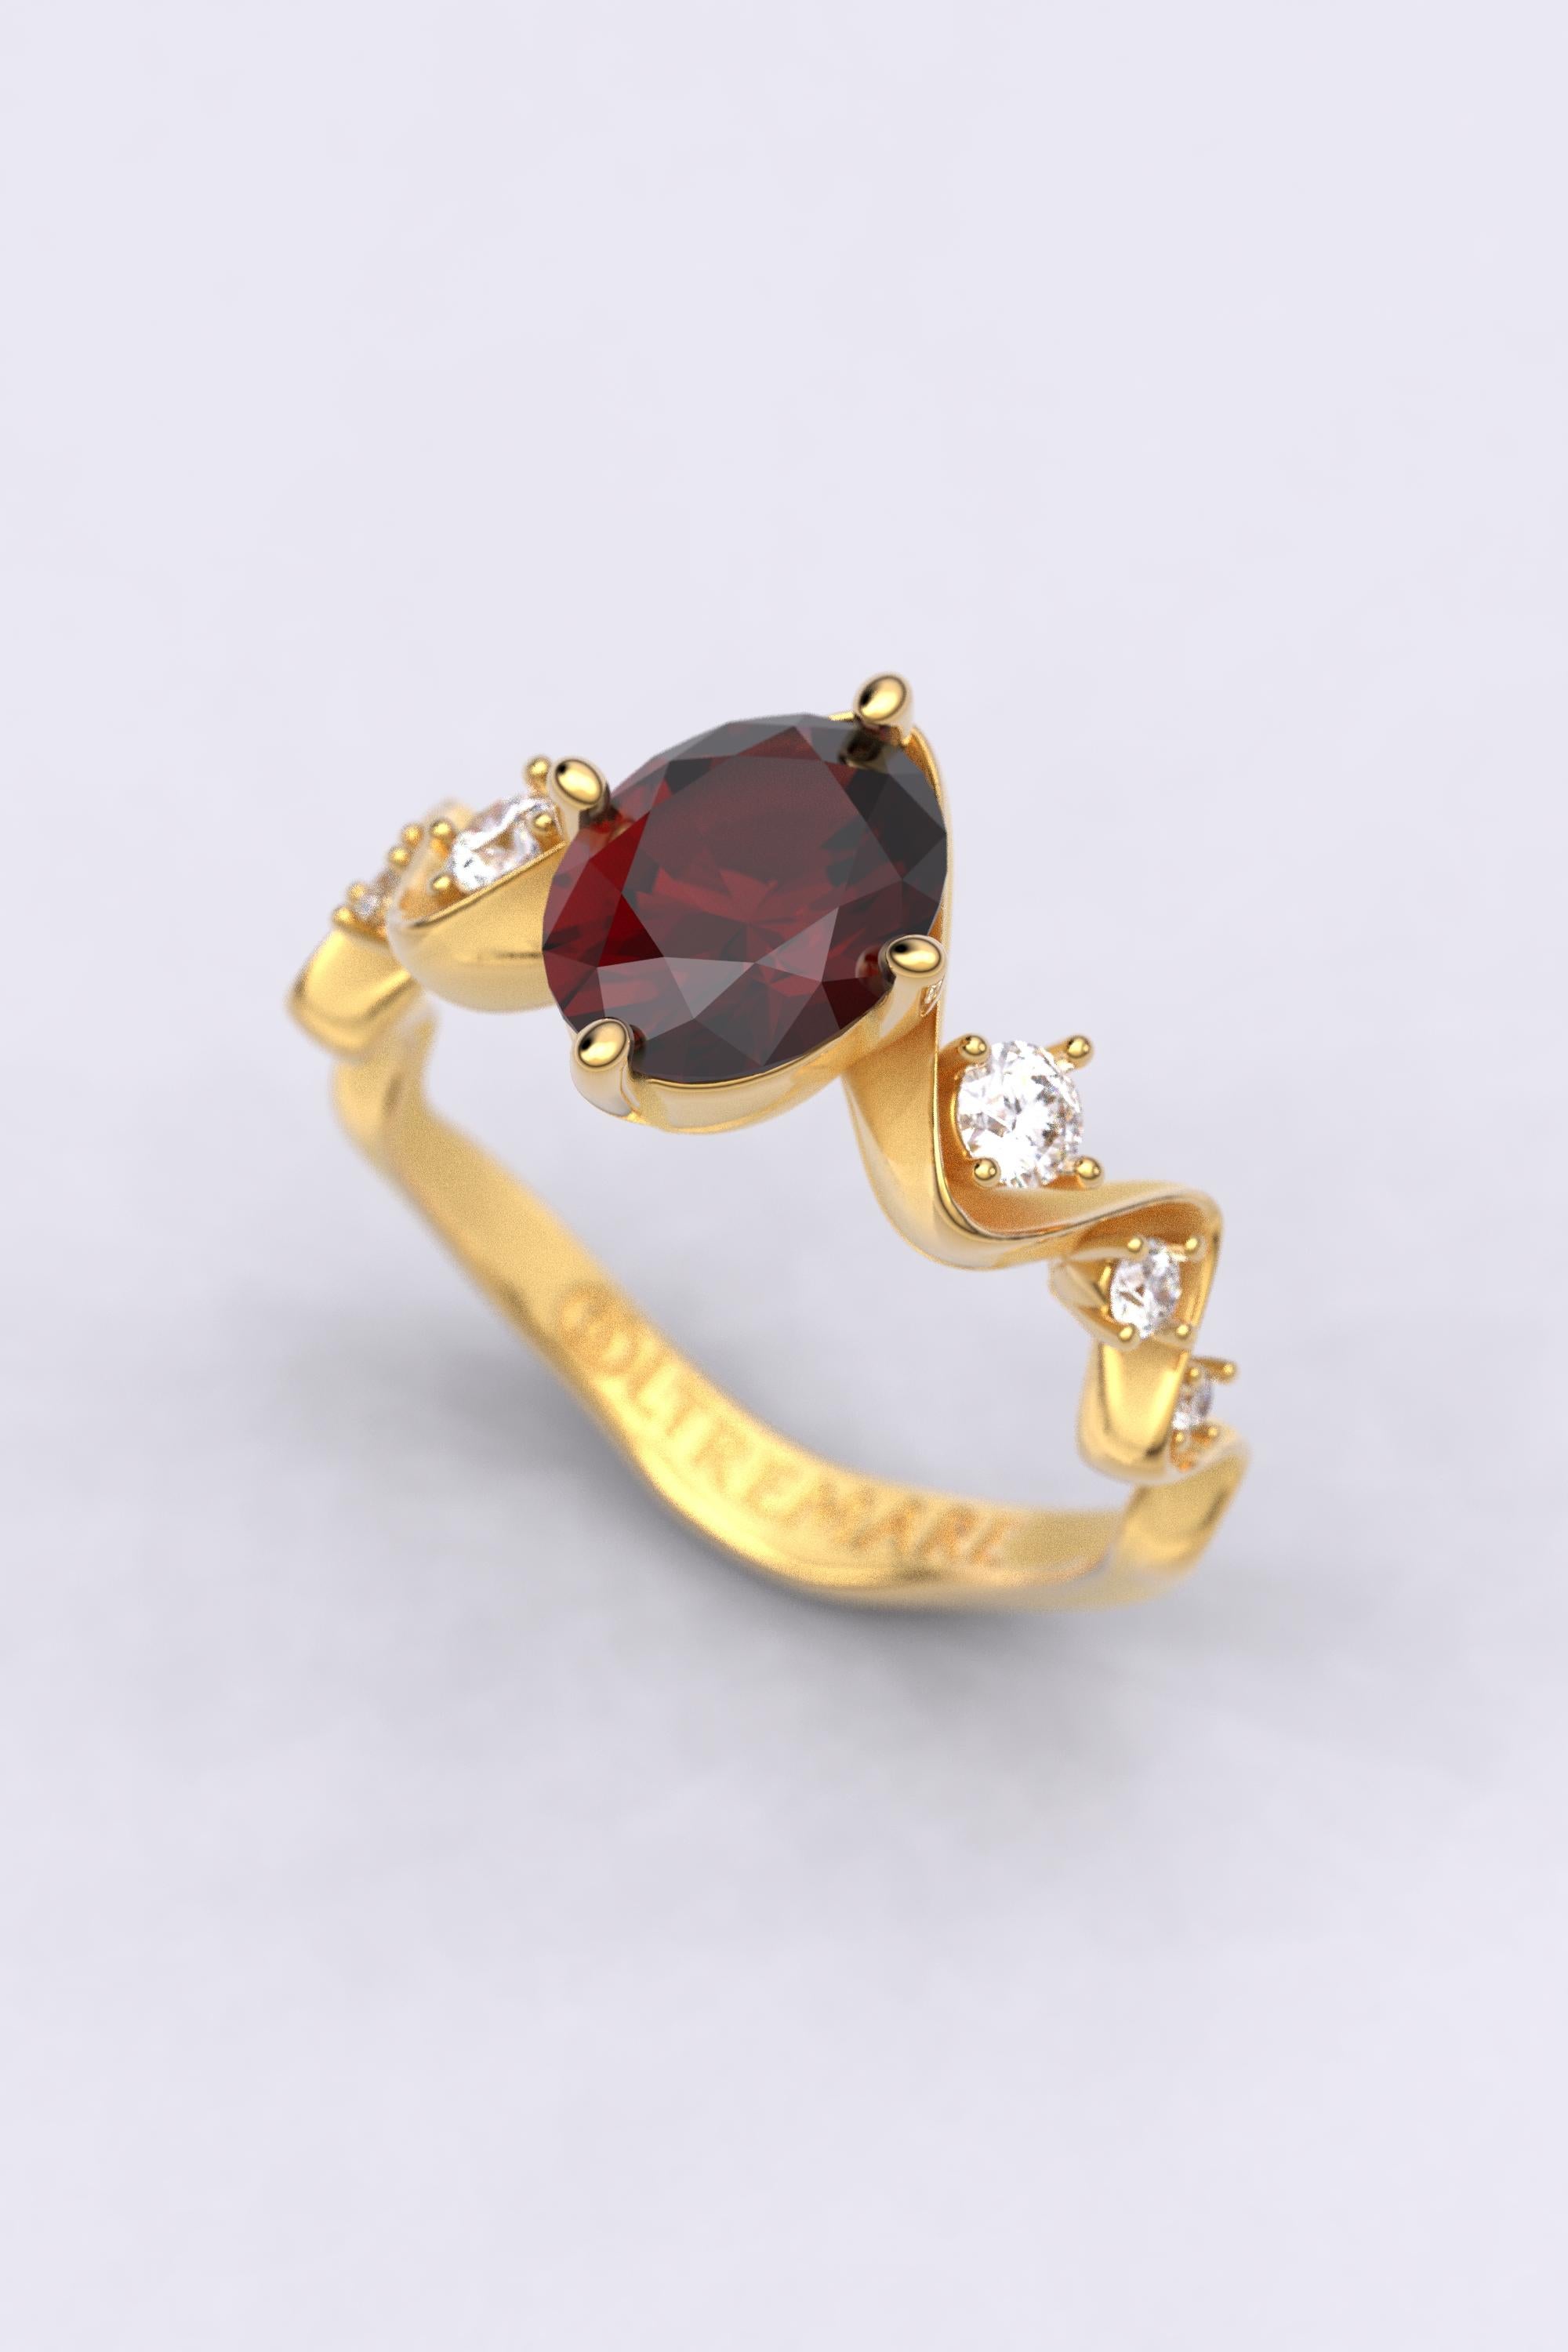 For Sale:  Garnet and Diamonds Engagement Ring Made in Italy by Oltremare Gioielli 18k Gold 2